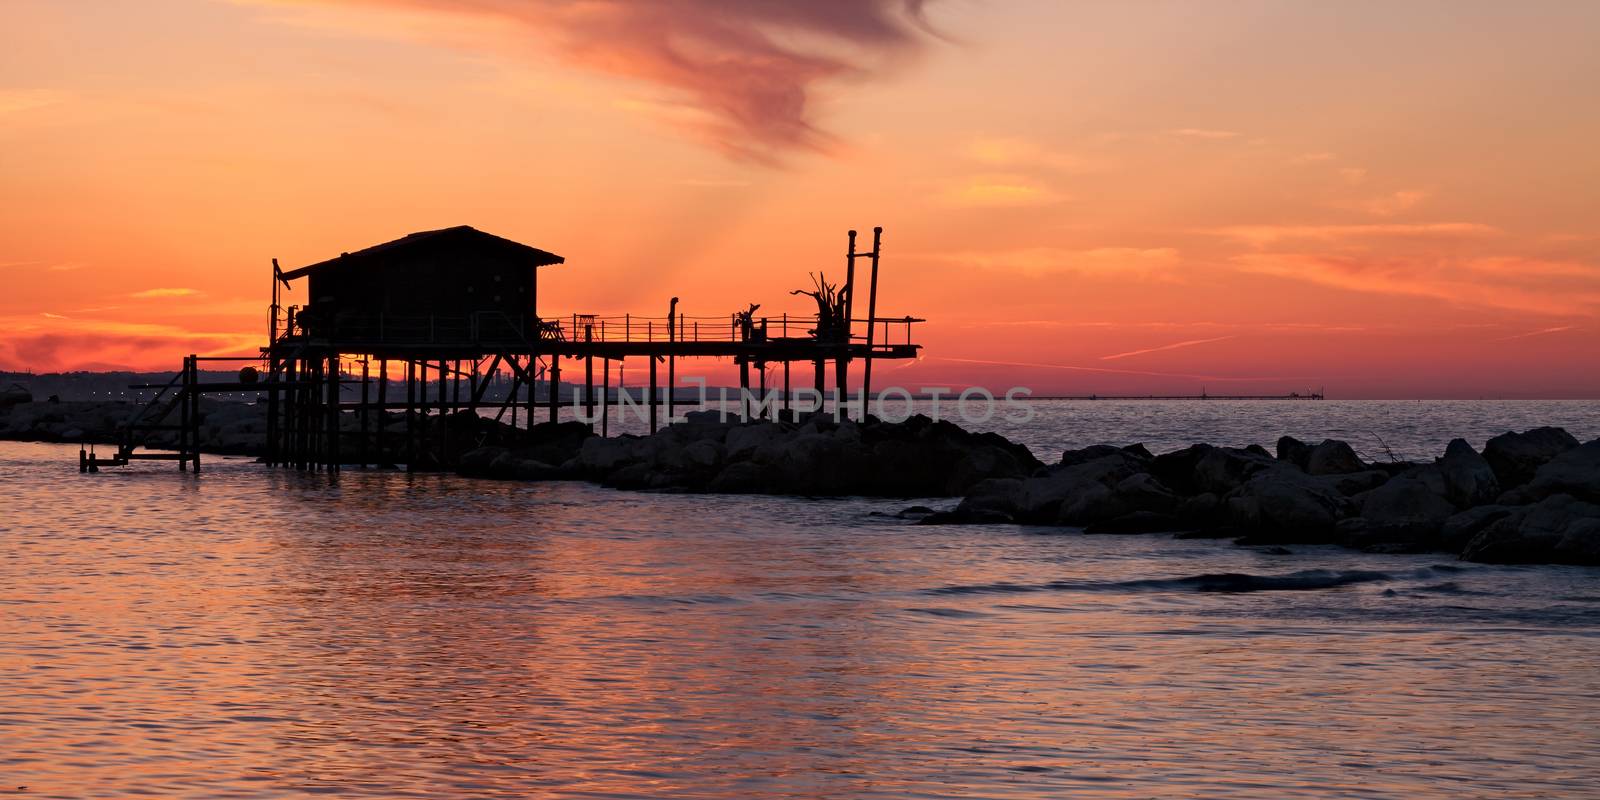 Stilt house over the sea in a beautiful red sunset